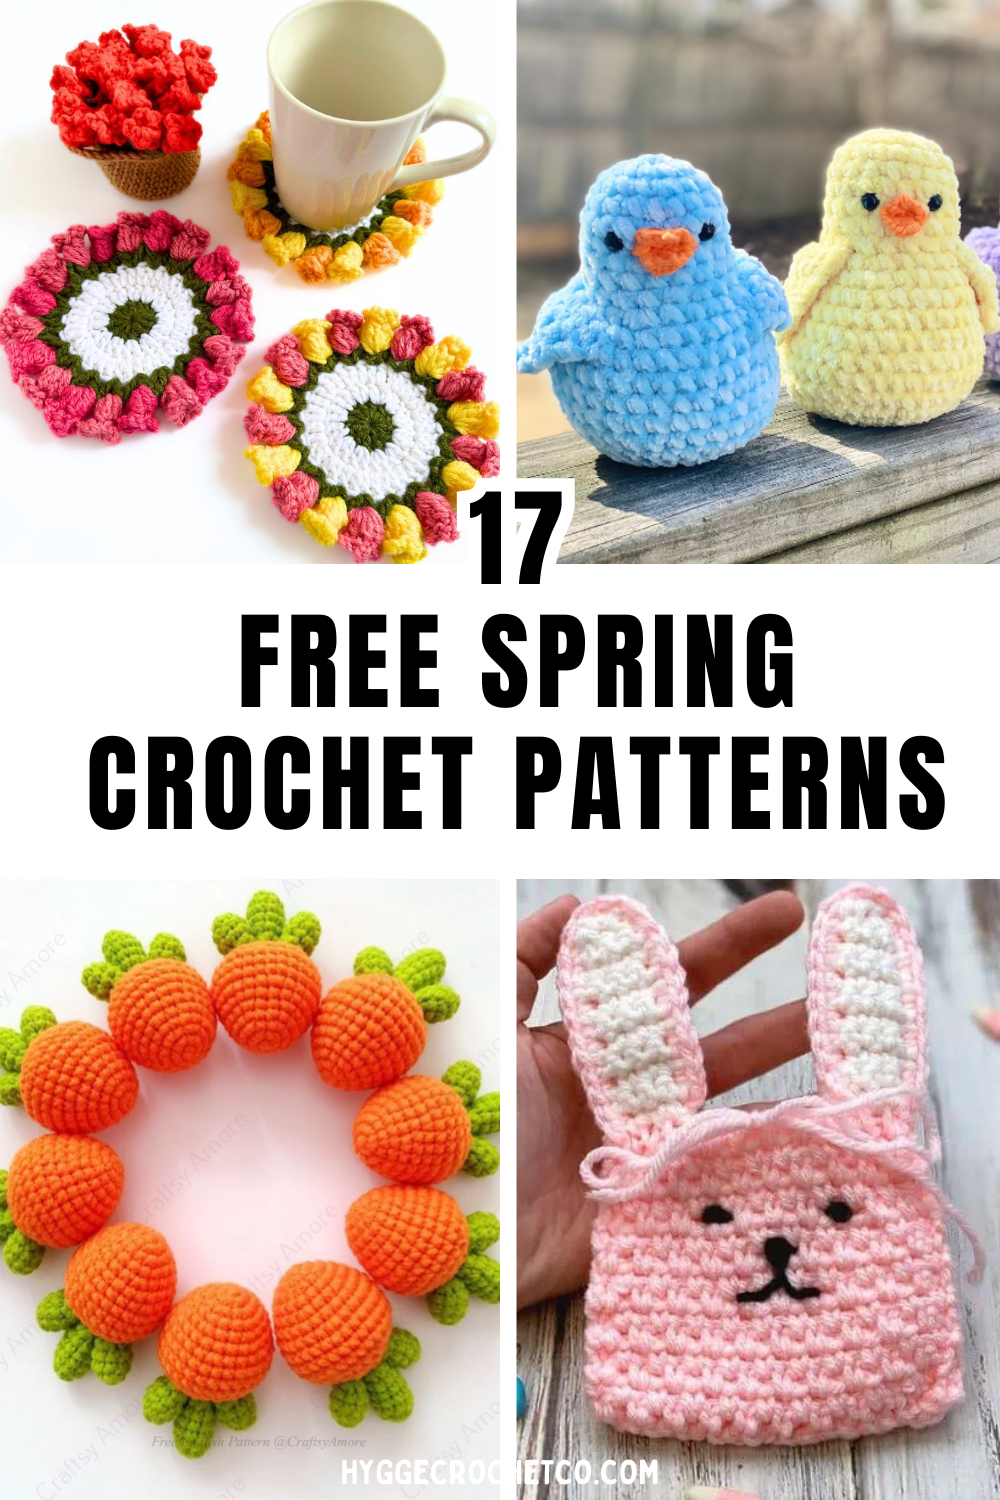 17 Free Crochet Patterns for Spring